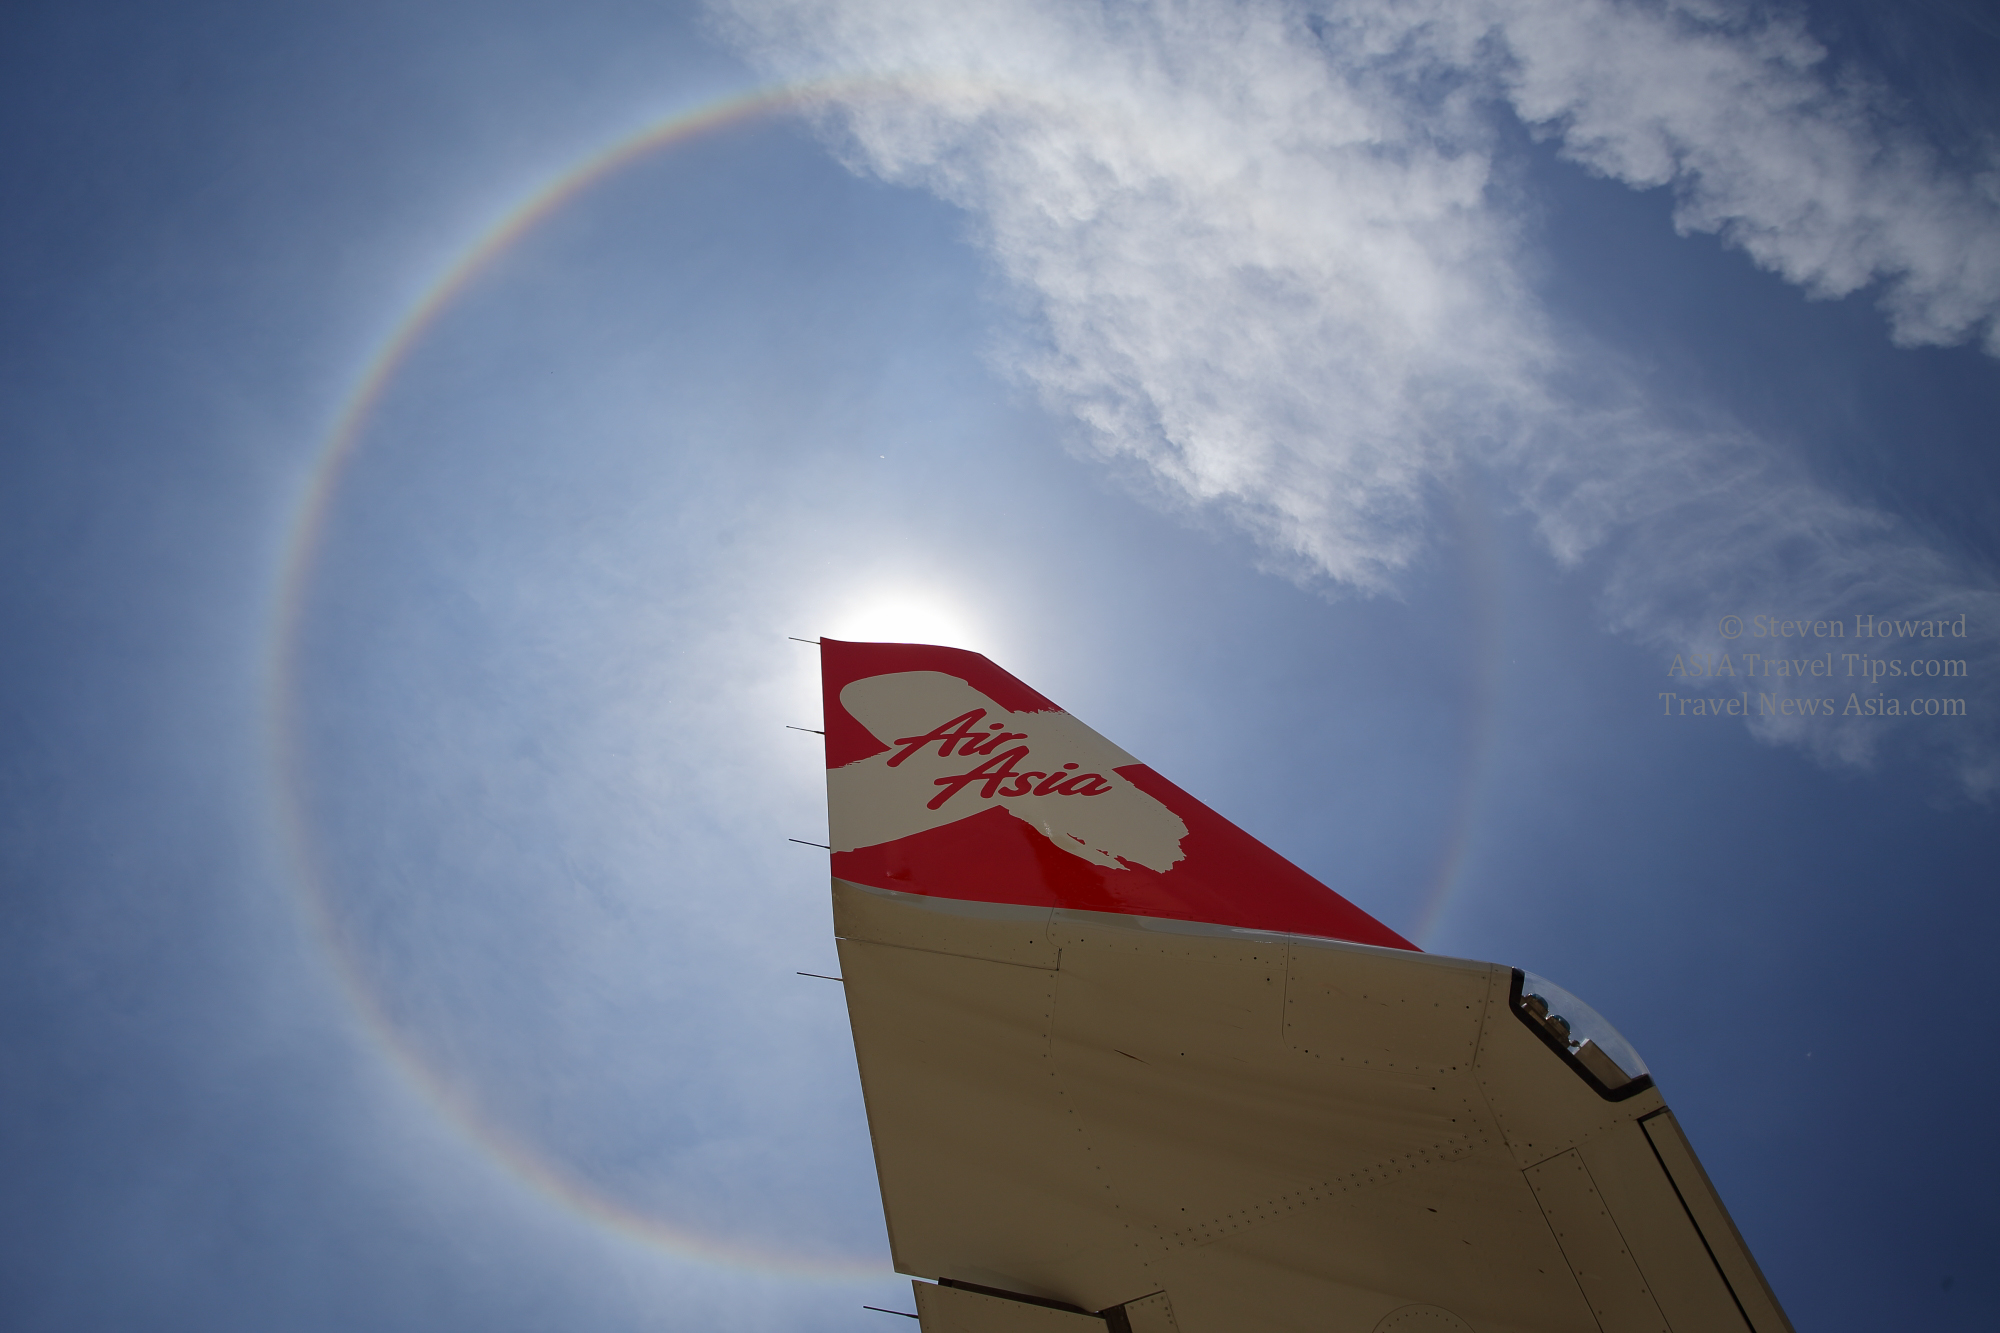 Strange effect in the very sunny sky over Don Mueang Airport in Bangkok on 14 May 2014 while filming Thai AirAsia X's Airbus A330-300 Aircraft - HD Video Tour